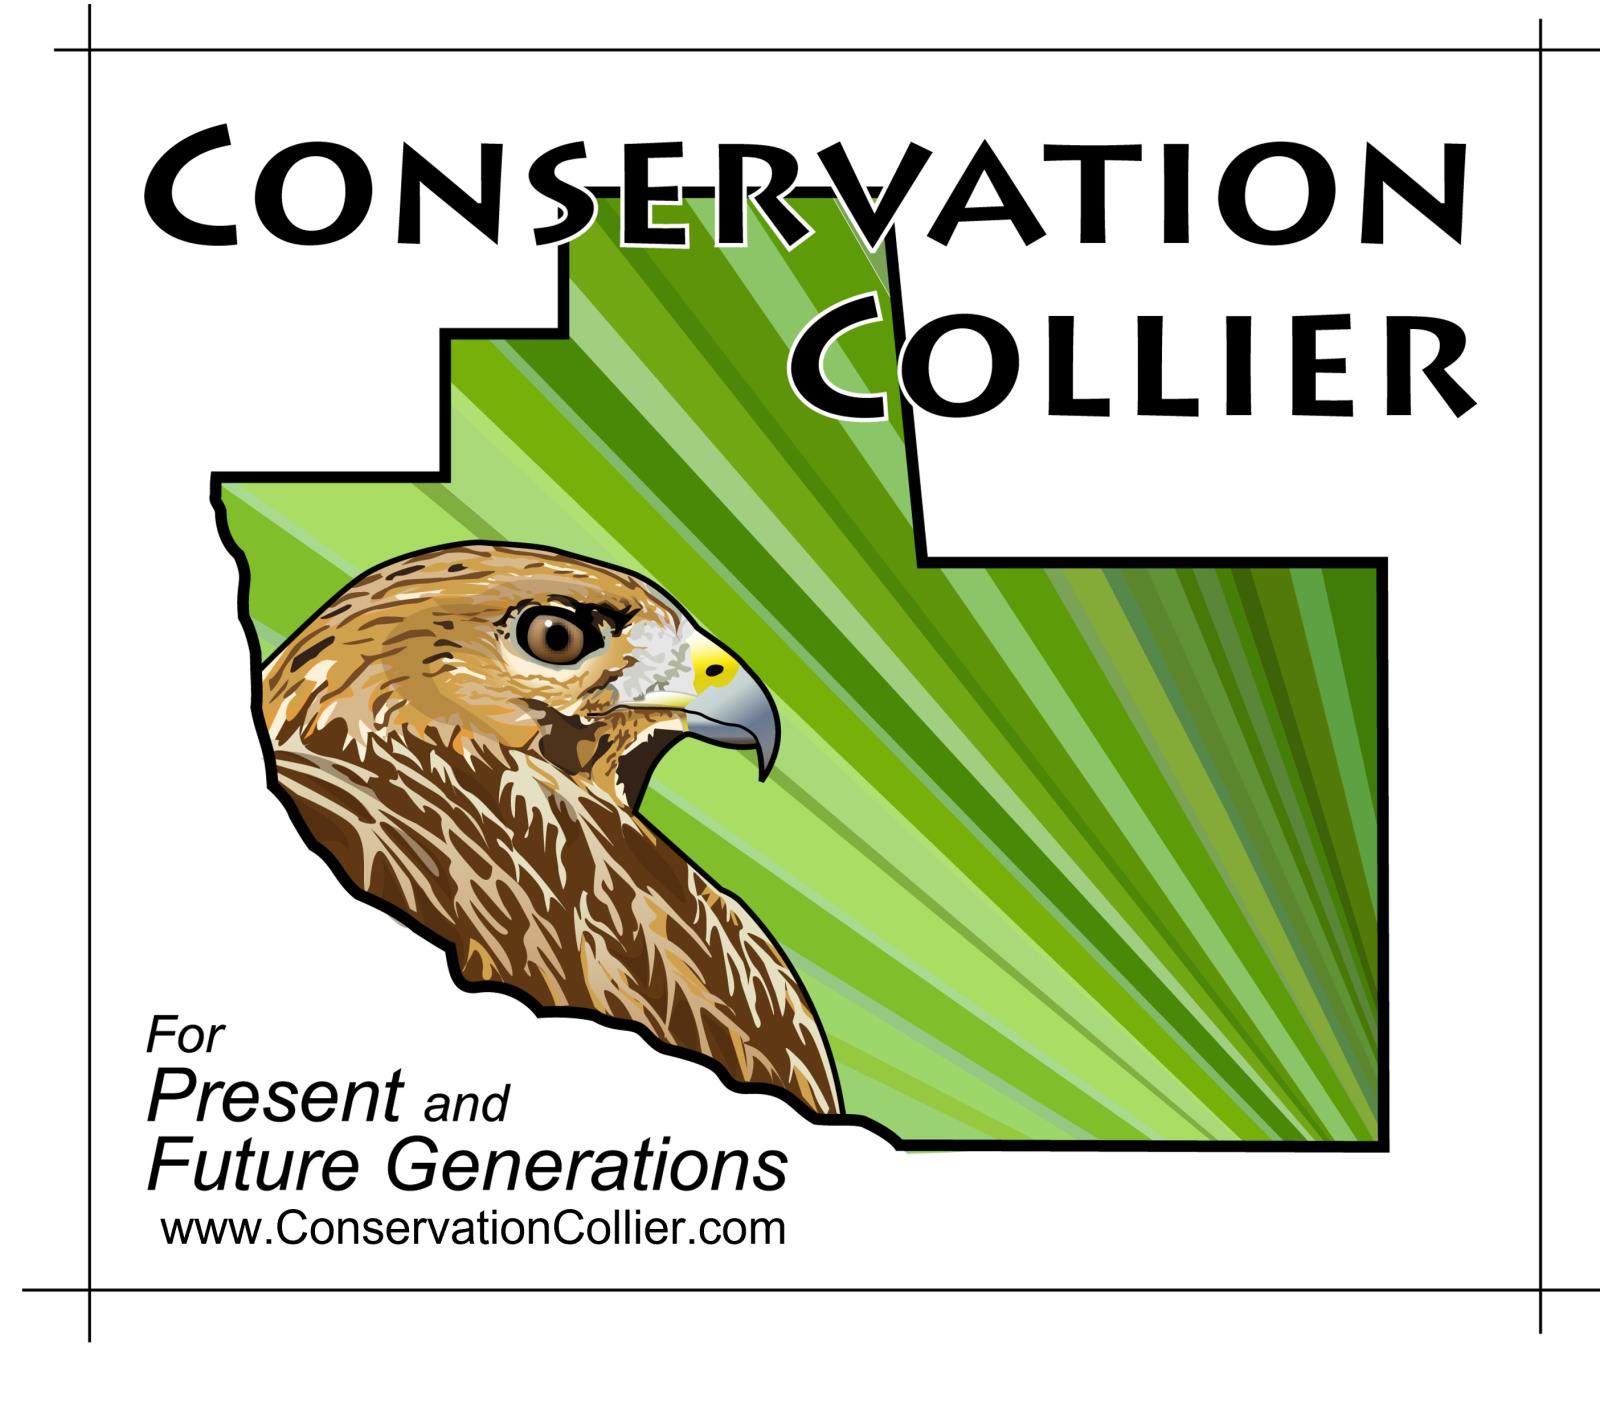 Conservation Collier logo with subtext